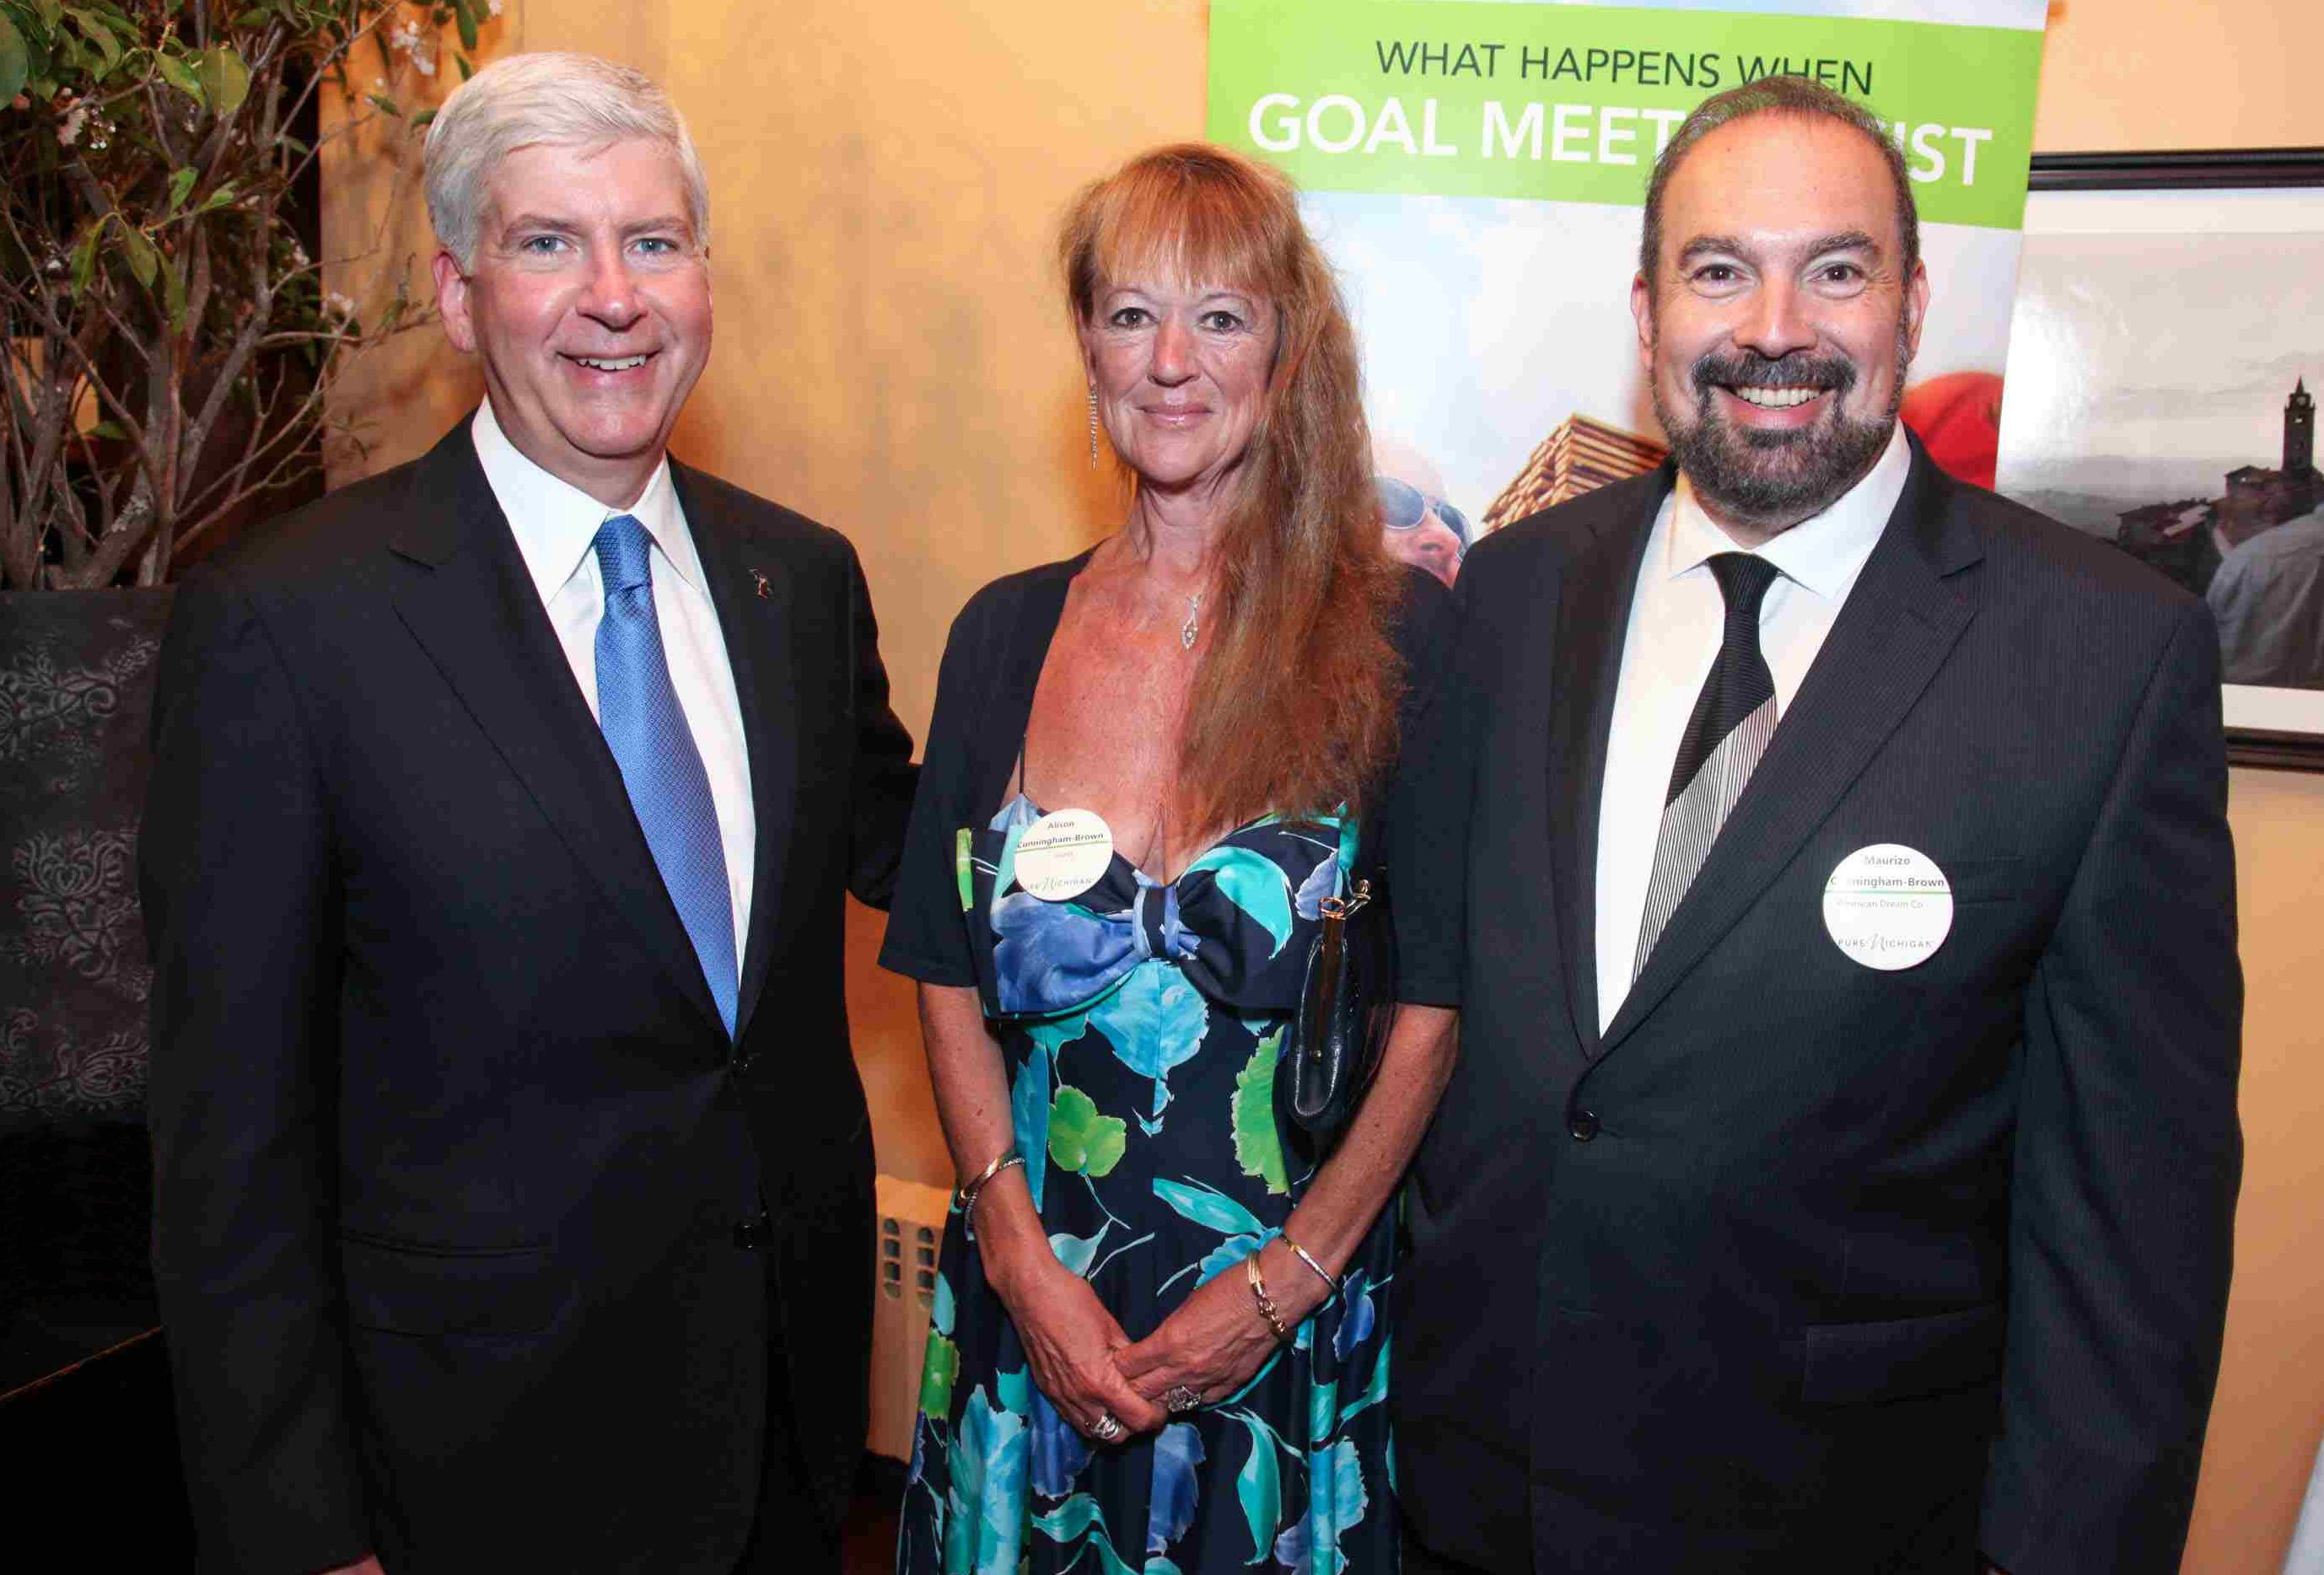 Governor_Rick_Snyder_(MI)_with_Maurizio_Cunningham-Brown_(CEO_American_Dream_Co)_and_his_wife_Alison